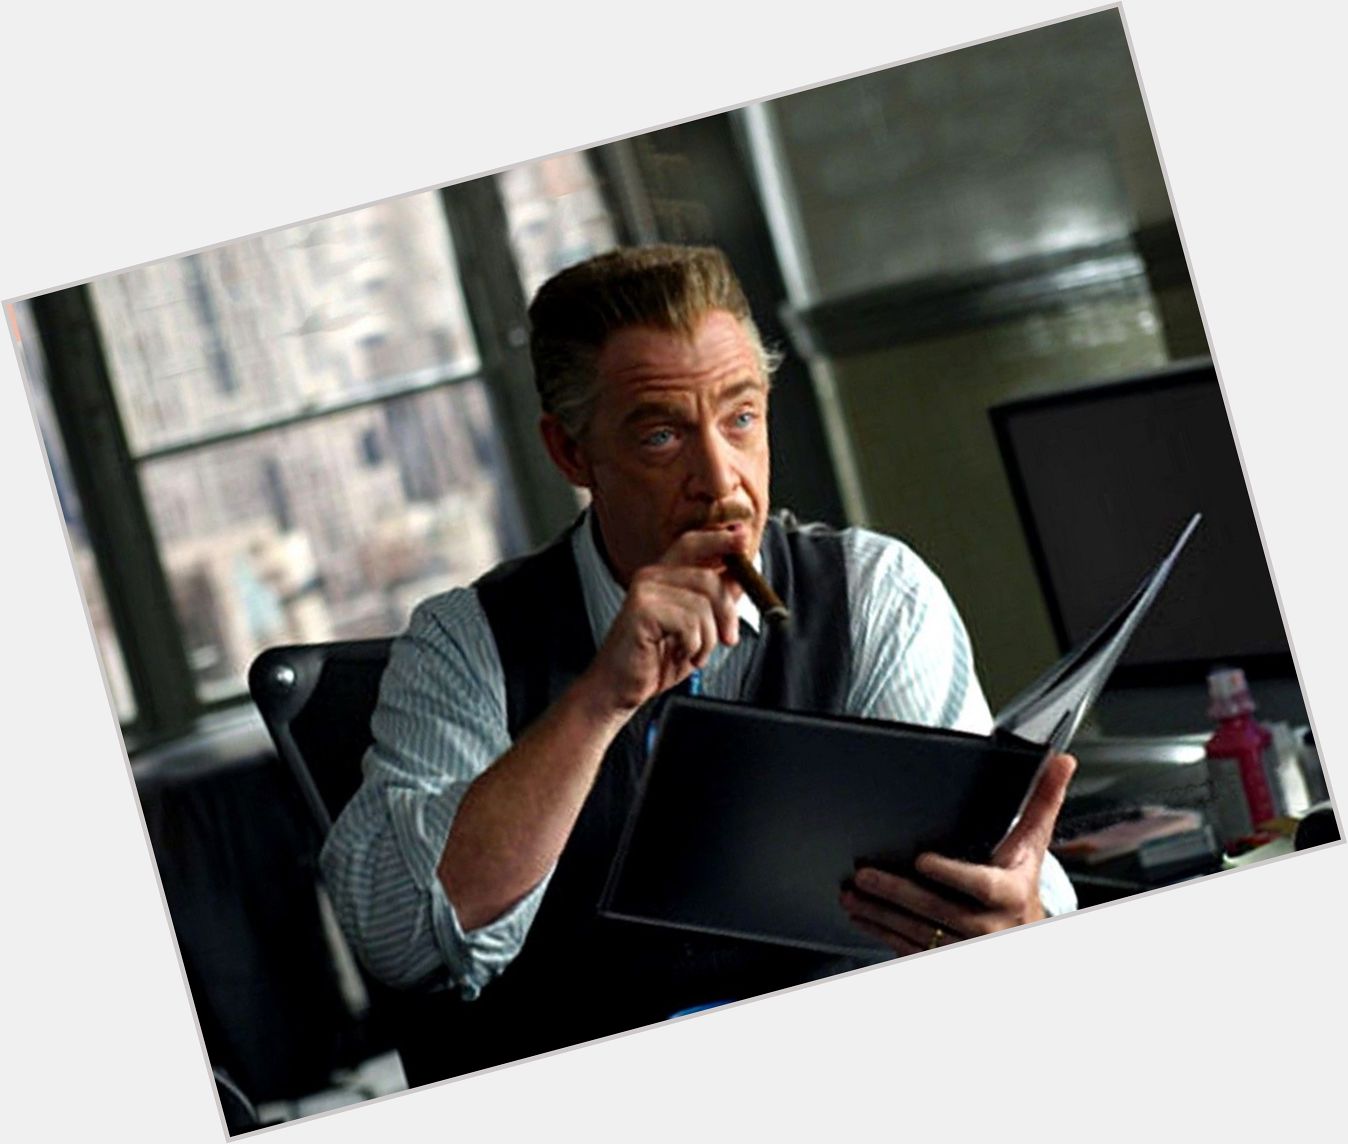 Happy Birthday J.K Simmons 63 years old today

Here he is in Spider-Man (2002) 